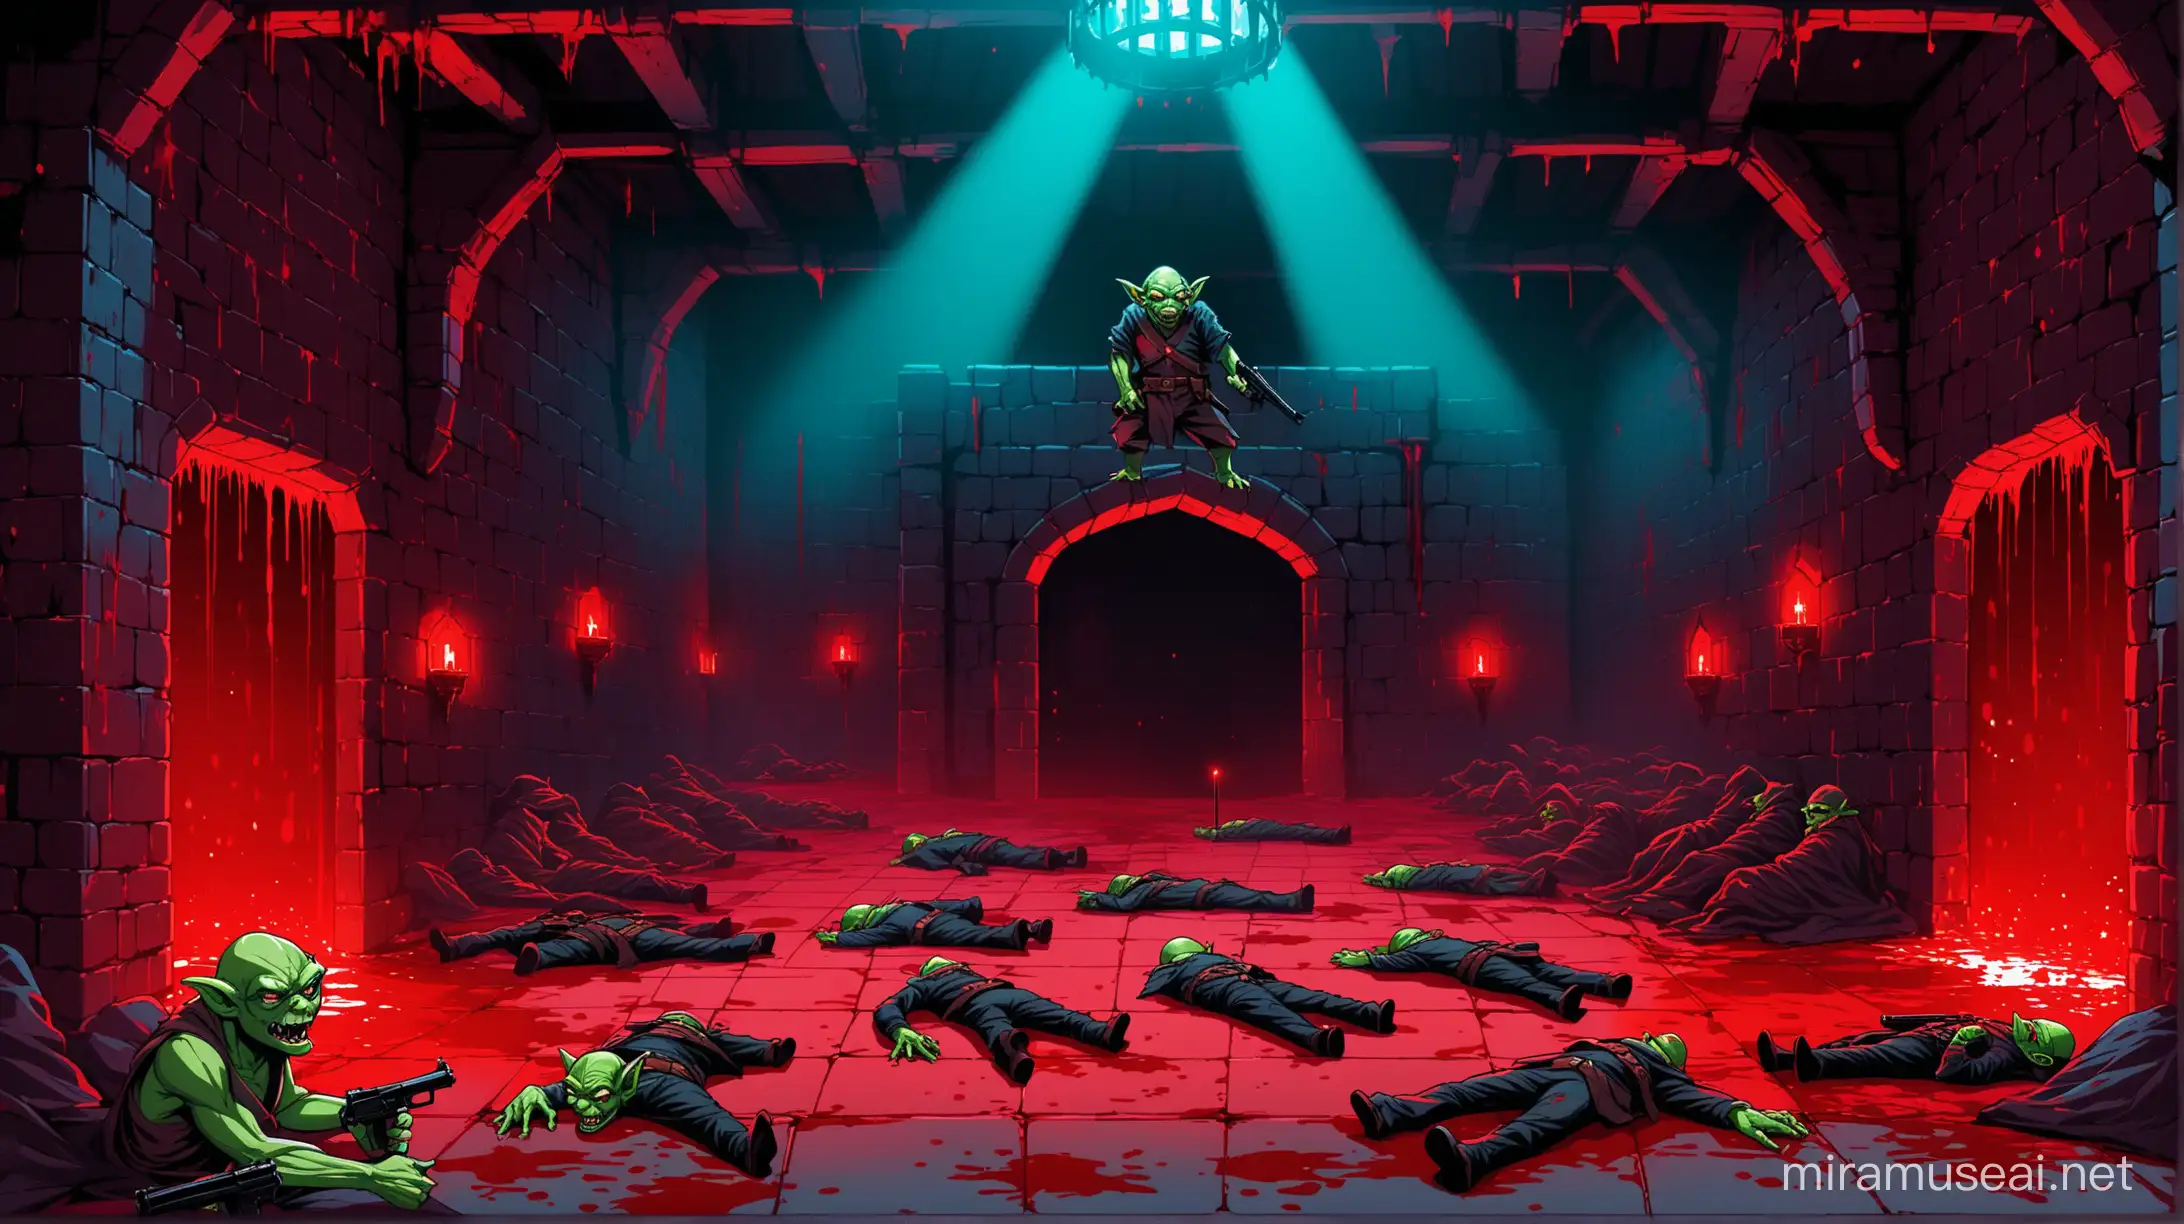 a small dungeon with cool colours, there is red lighting and blood splatter, there is a  goblin standing ominously, there are guns laying on the floor, there are dead bodies on the floor